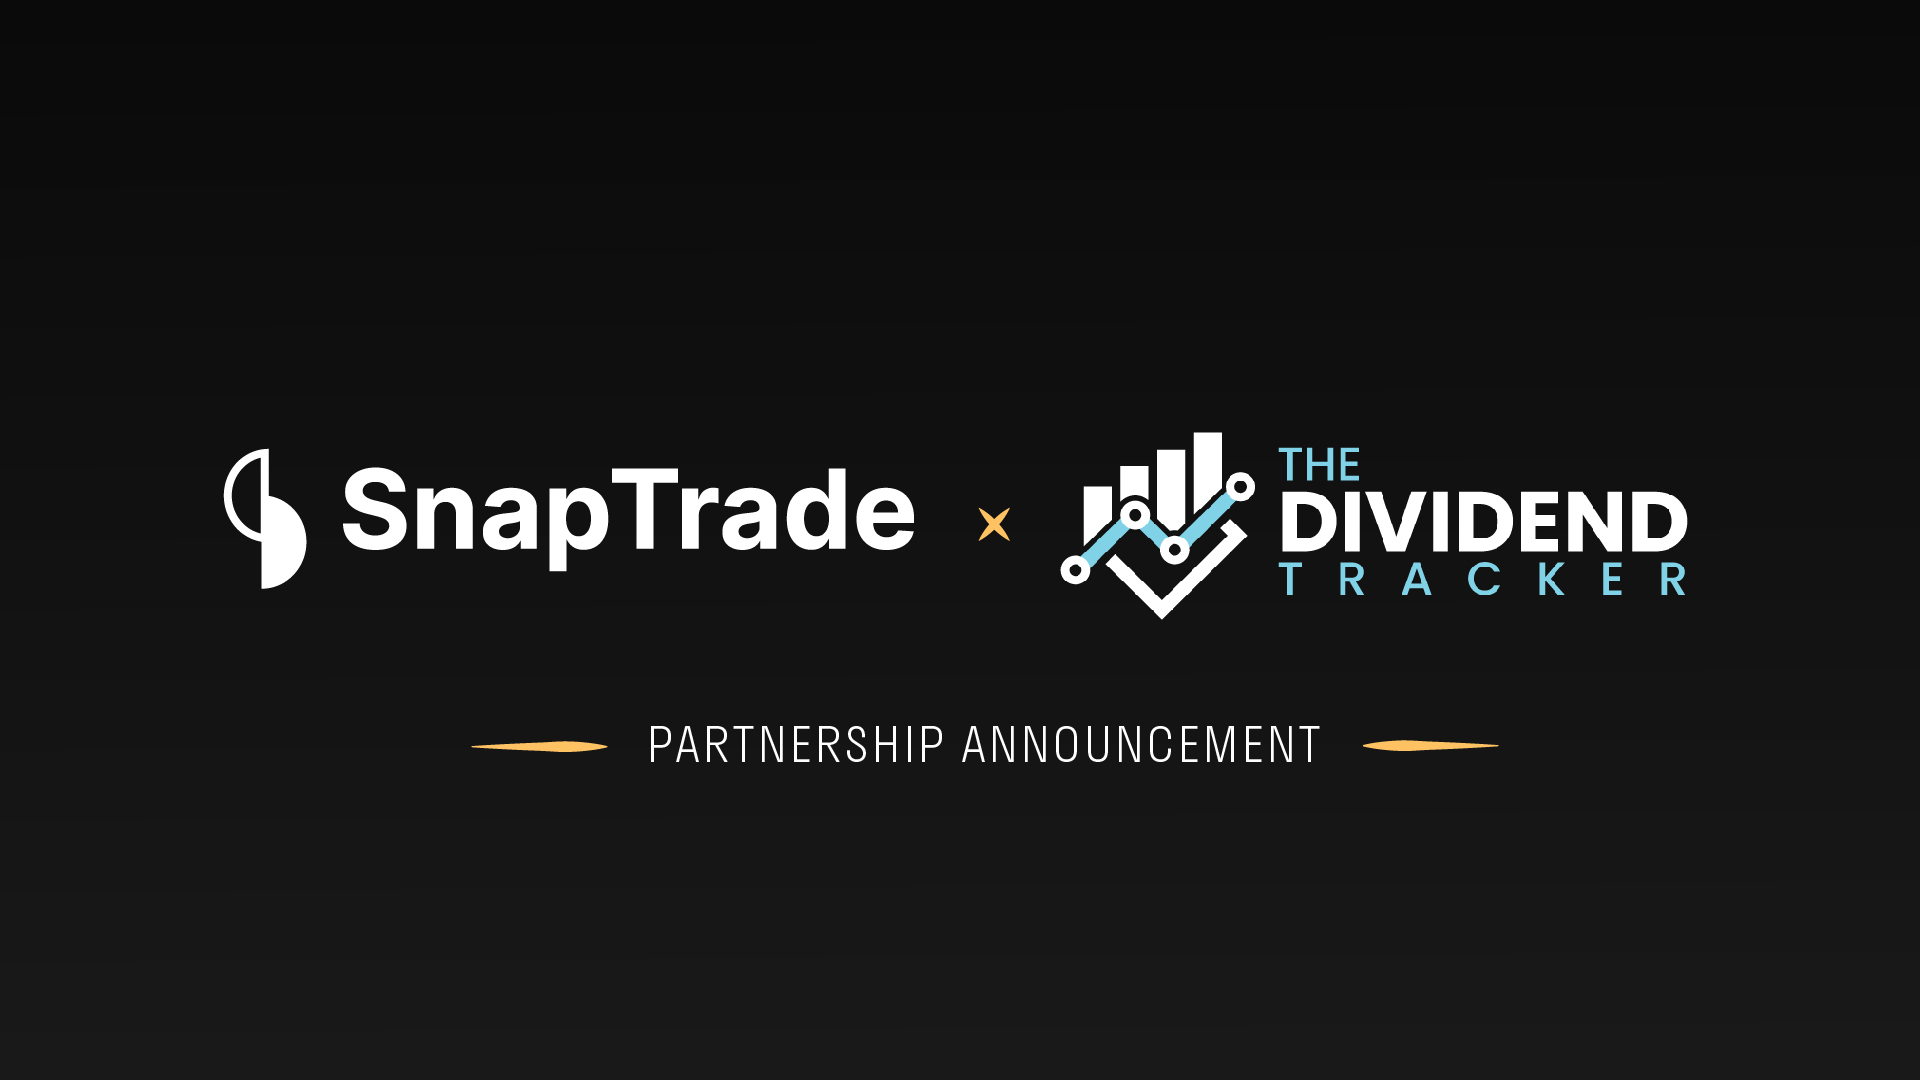 SnapTrade and The Dividend Tracker Partnership